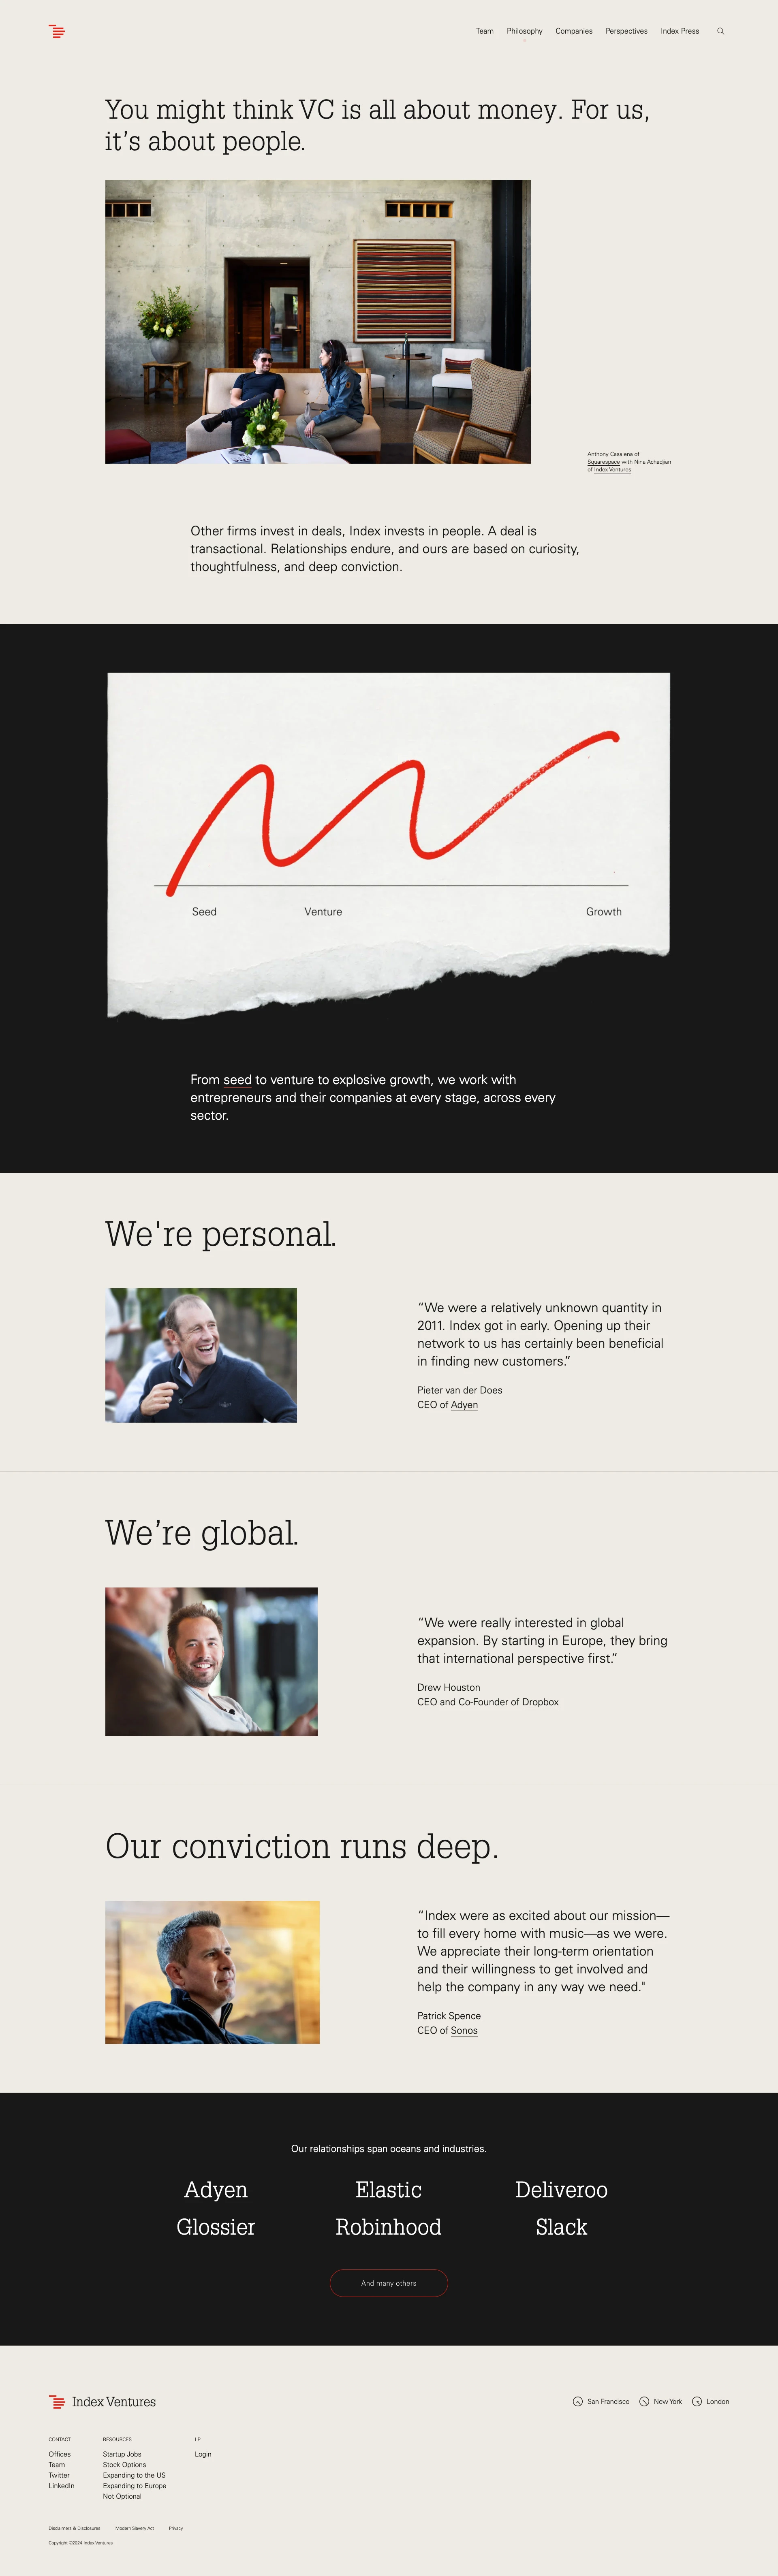 Index Ventures Landing Page Example: We invest in who you are, not just what you do. When it comes to the founders we work with, we look for the unexpected. The ground breakers and game-changers with a fire inside that can’t be dimmed or duplicated. Because at Index, we’re invested in the people behind great ideas.